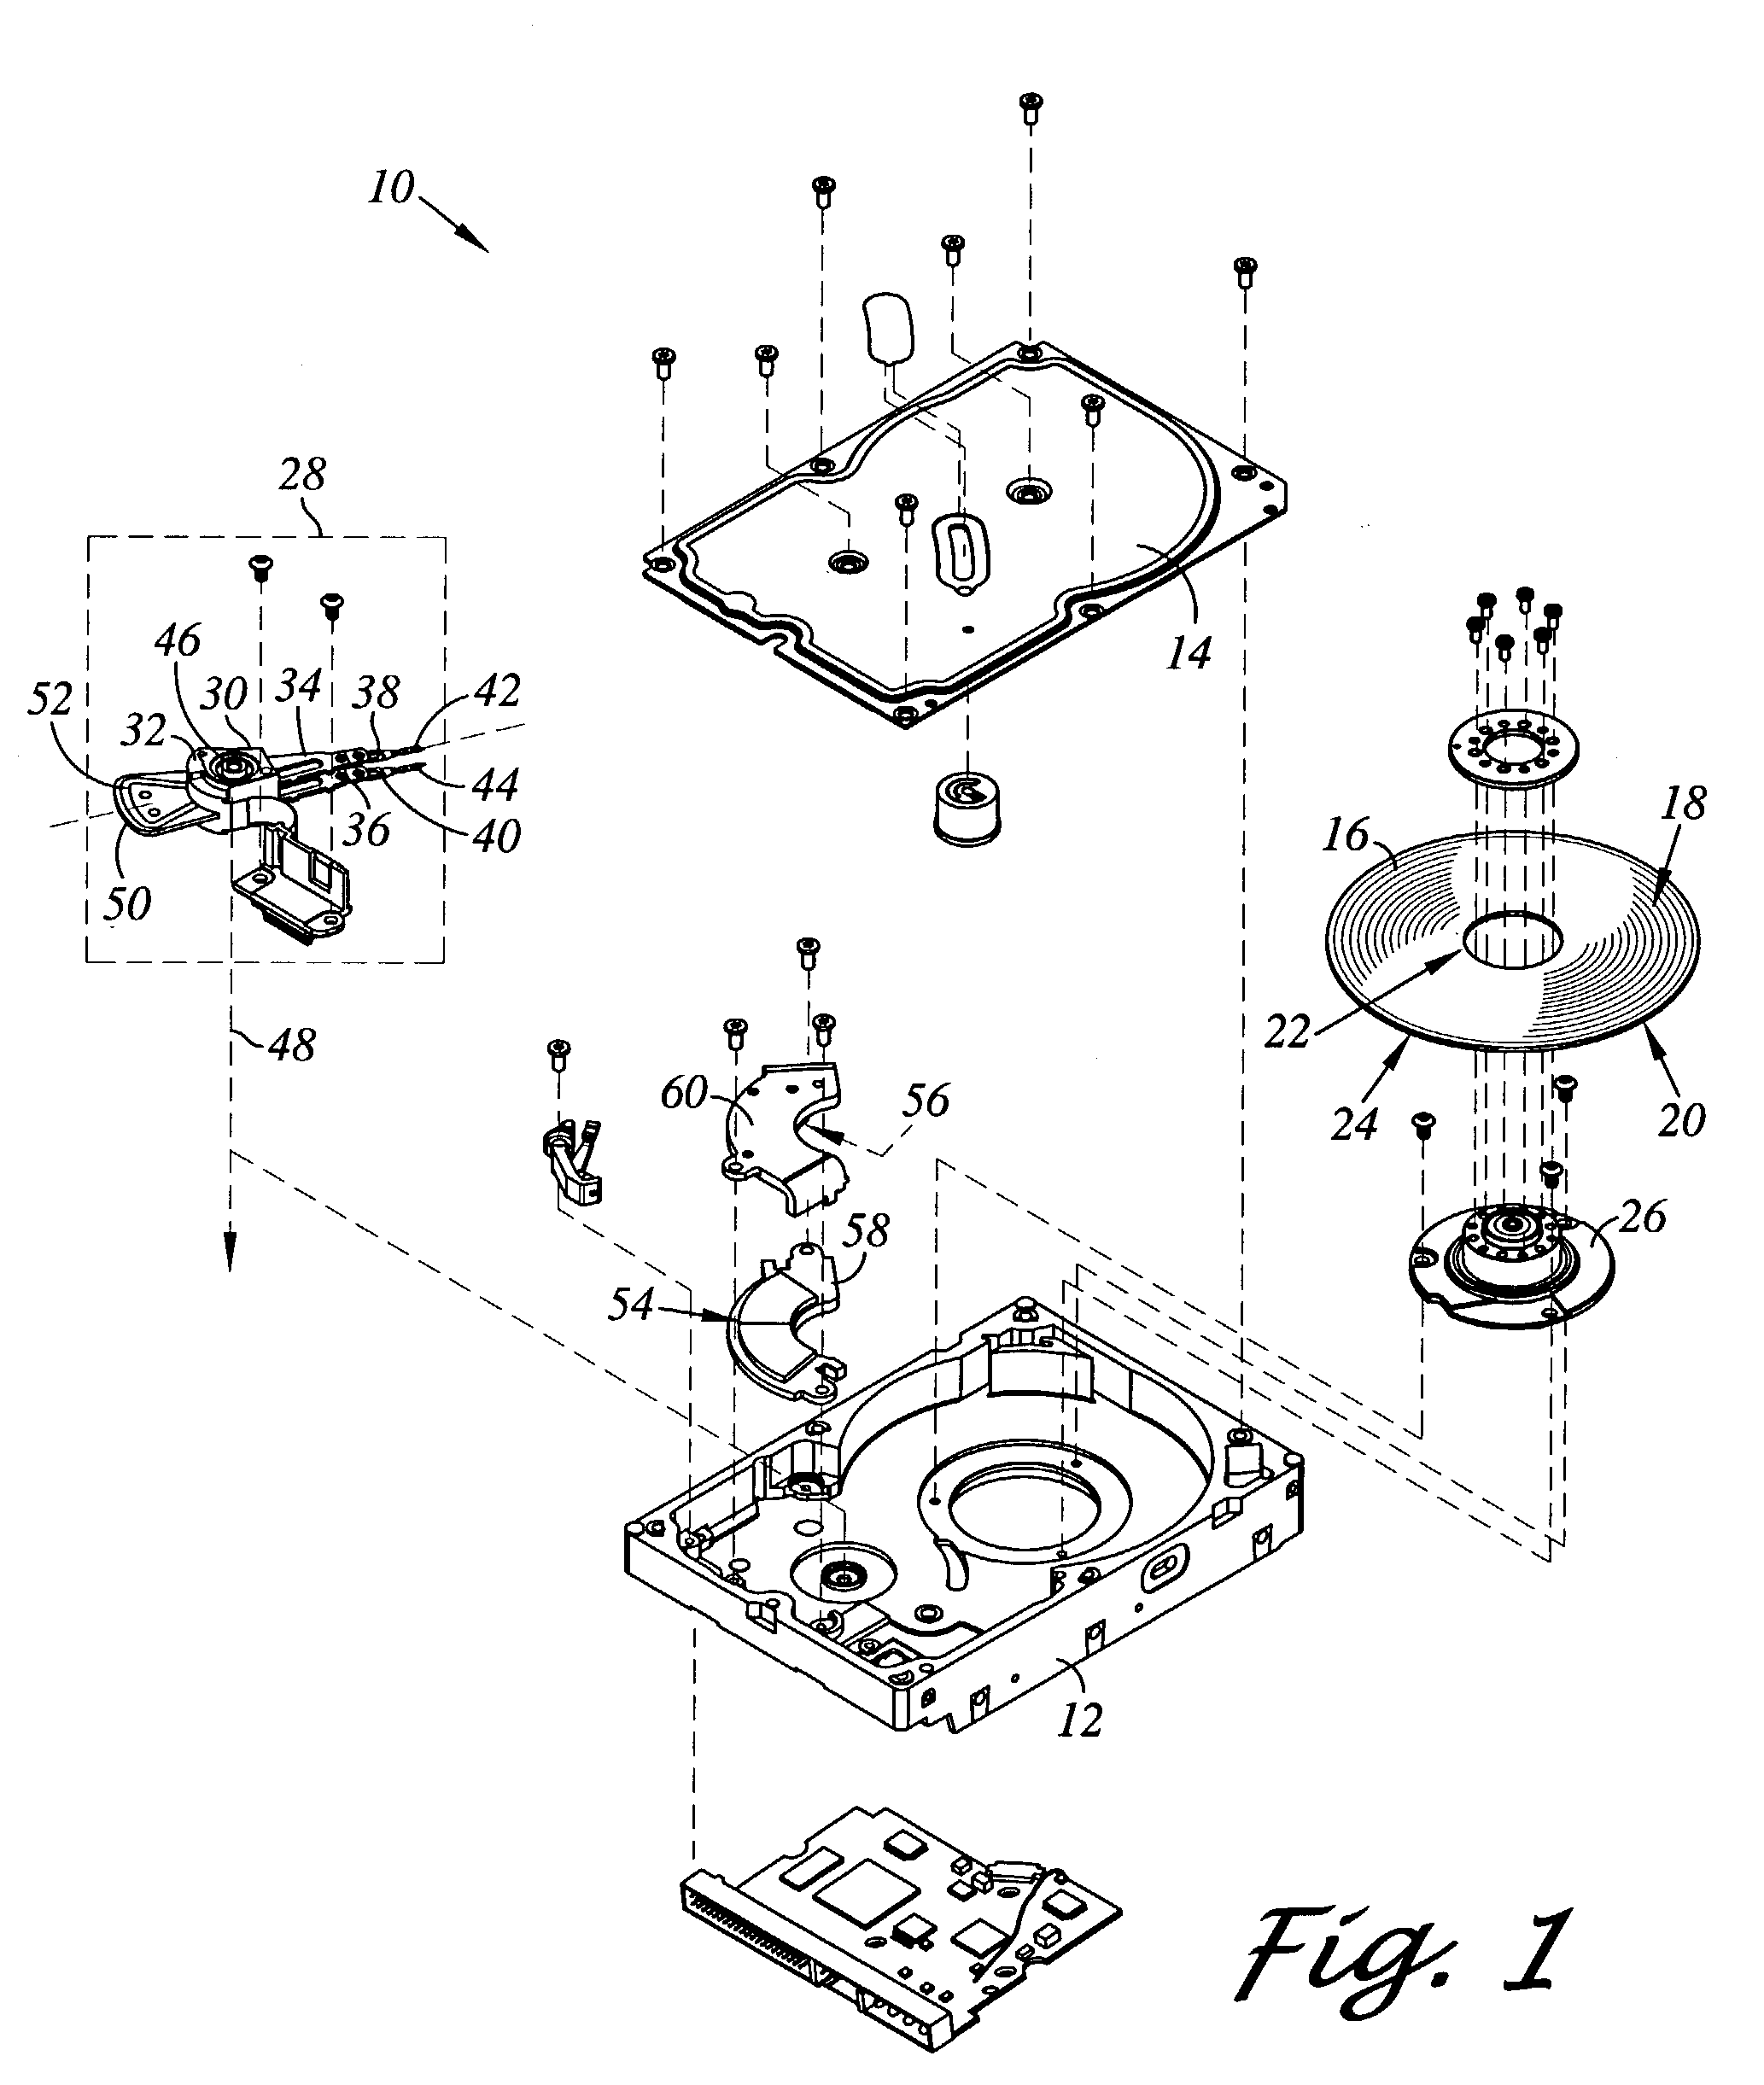 Head stack assembly including a ground conductive pad for grounding a slider to a gimbal